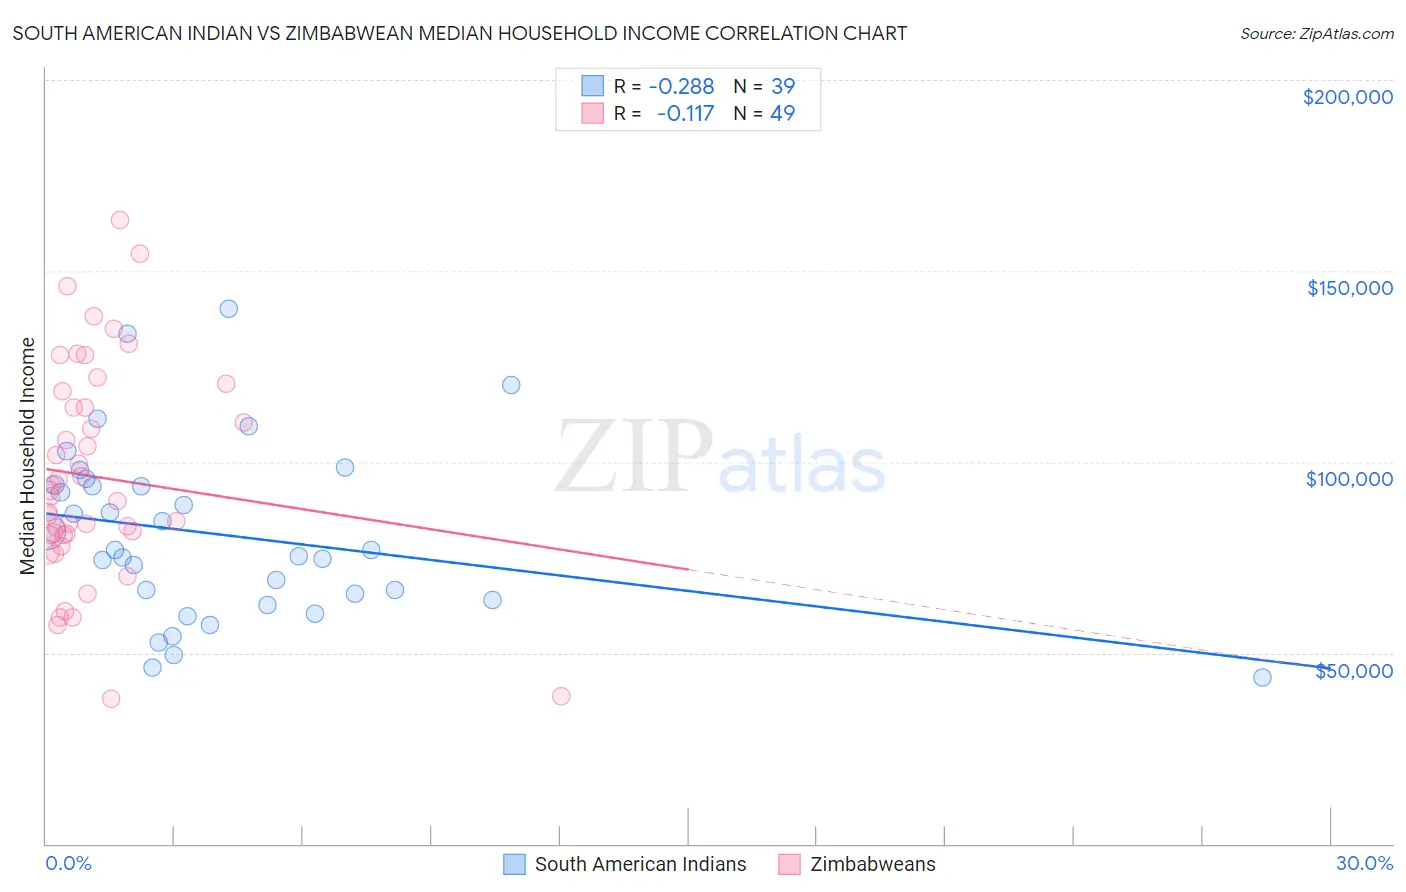 South American Indian vs Zimbabwean Median Household Income